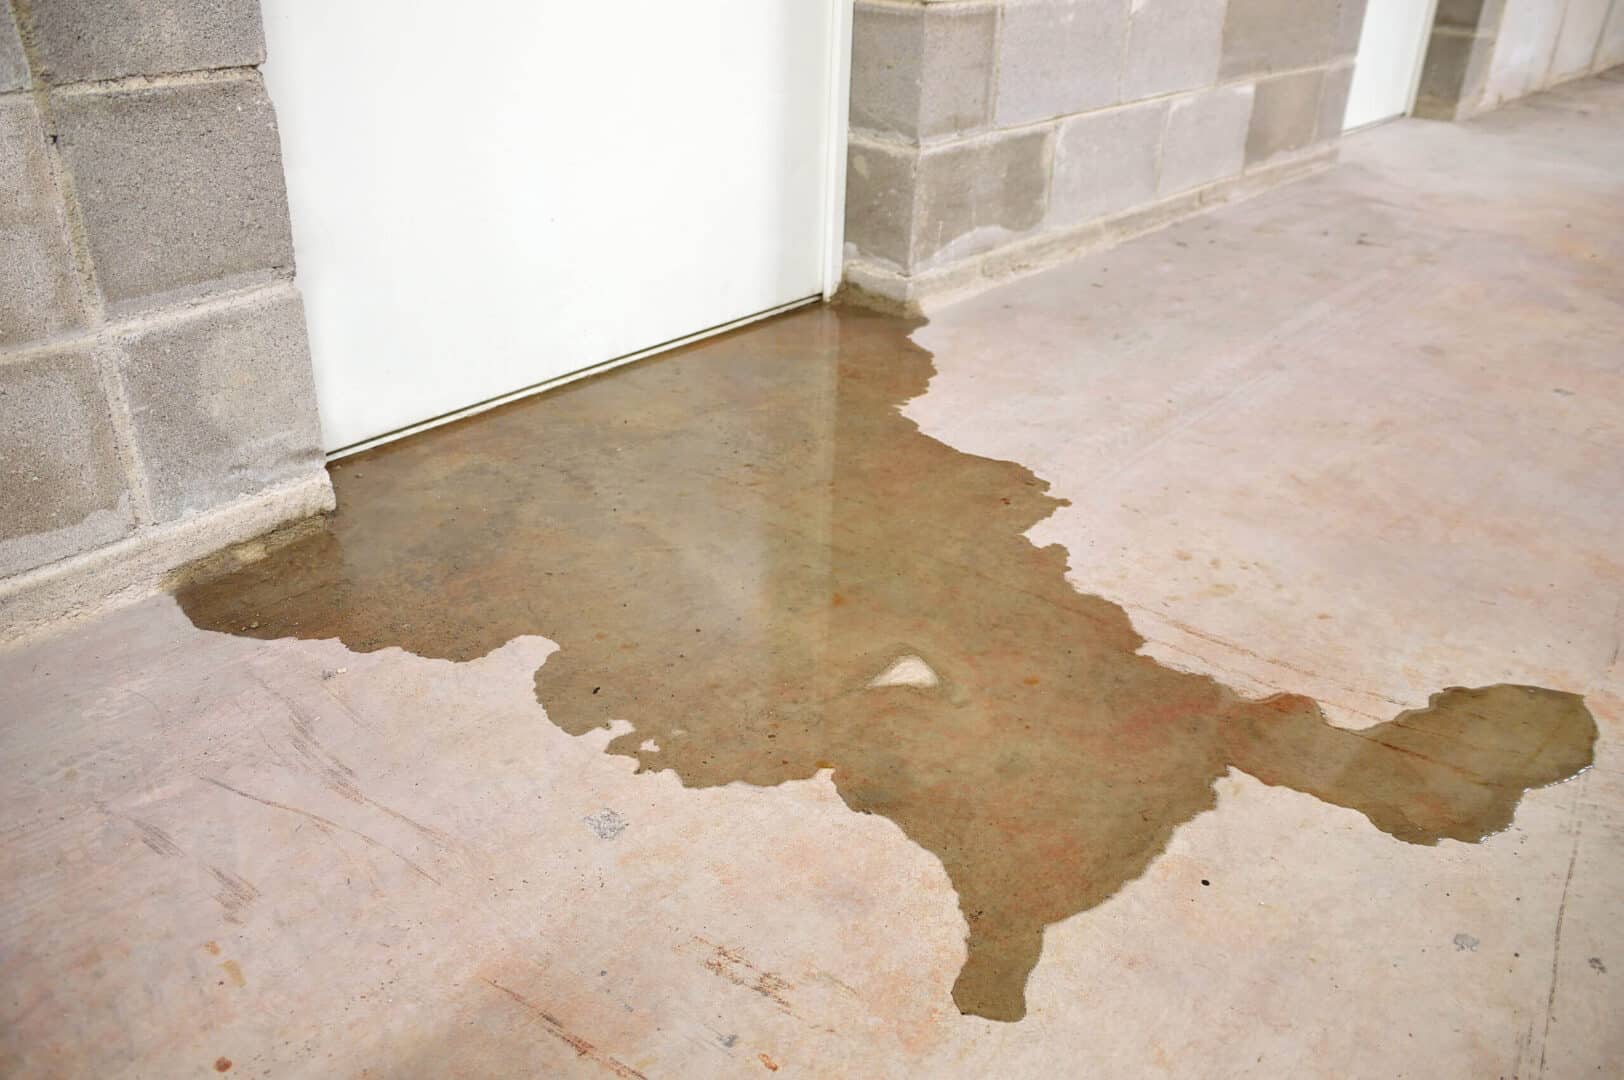 A puddle of water on the floor in front of a door.